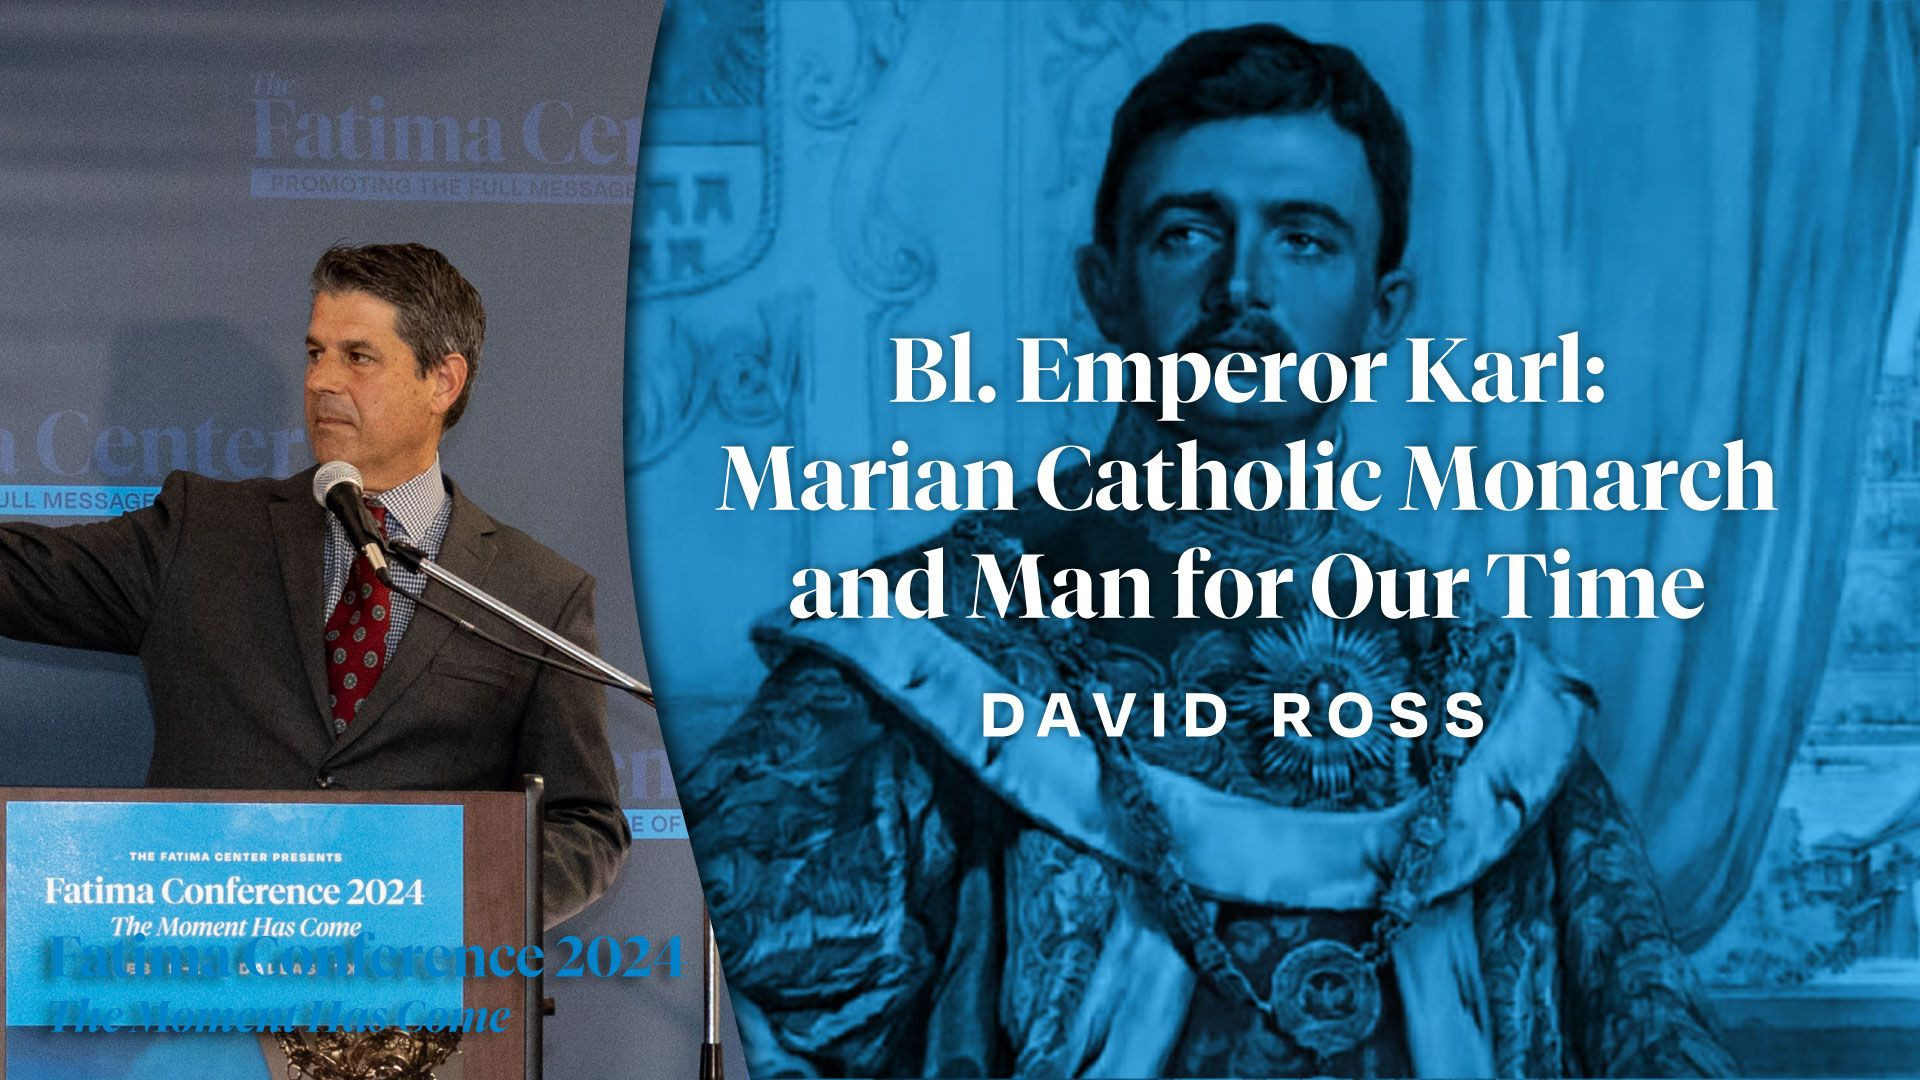 Bl. Emperor Karl: Marian Catholic Monarch and Man for Our Time by David Ross | FC24 Dallas, TX